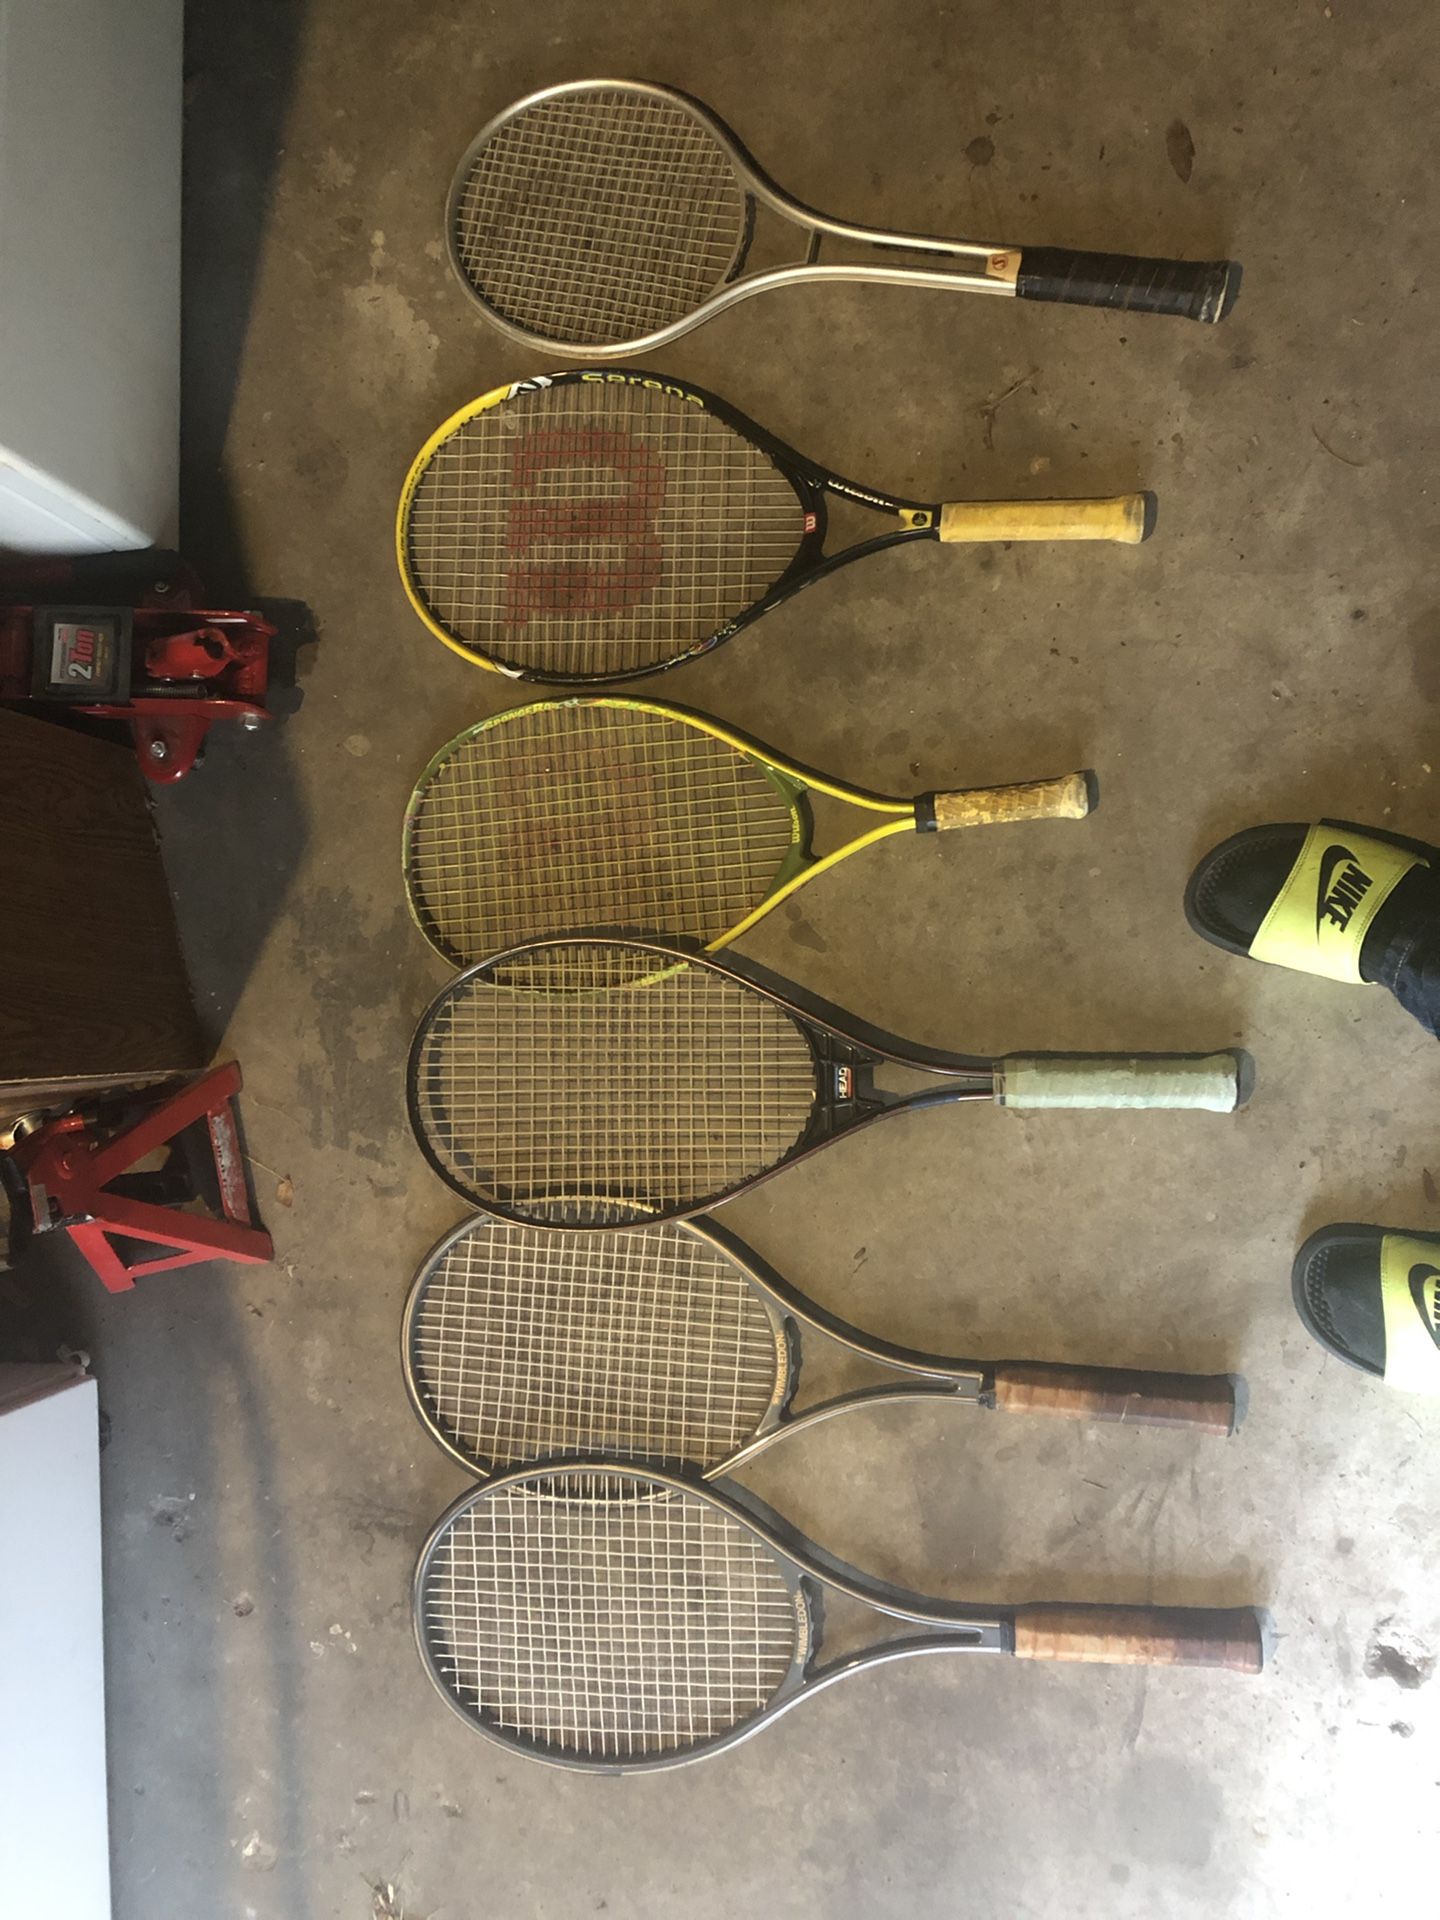 7 tennis rackets some pro different sizes